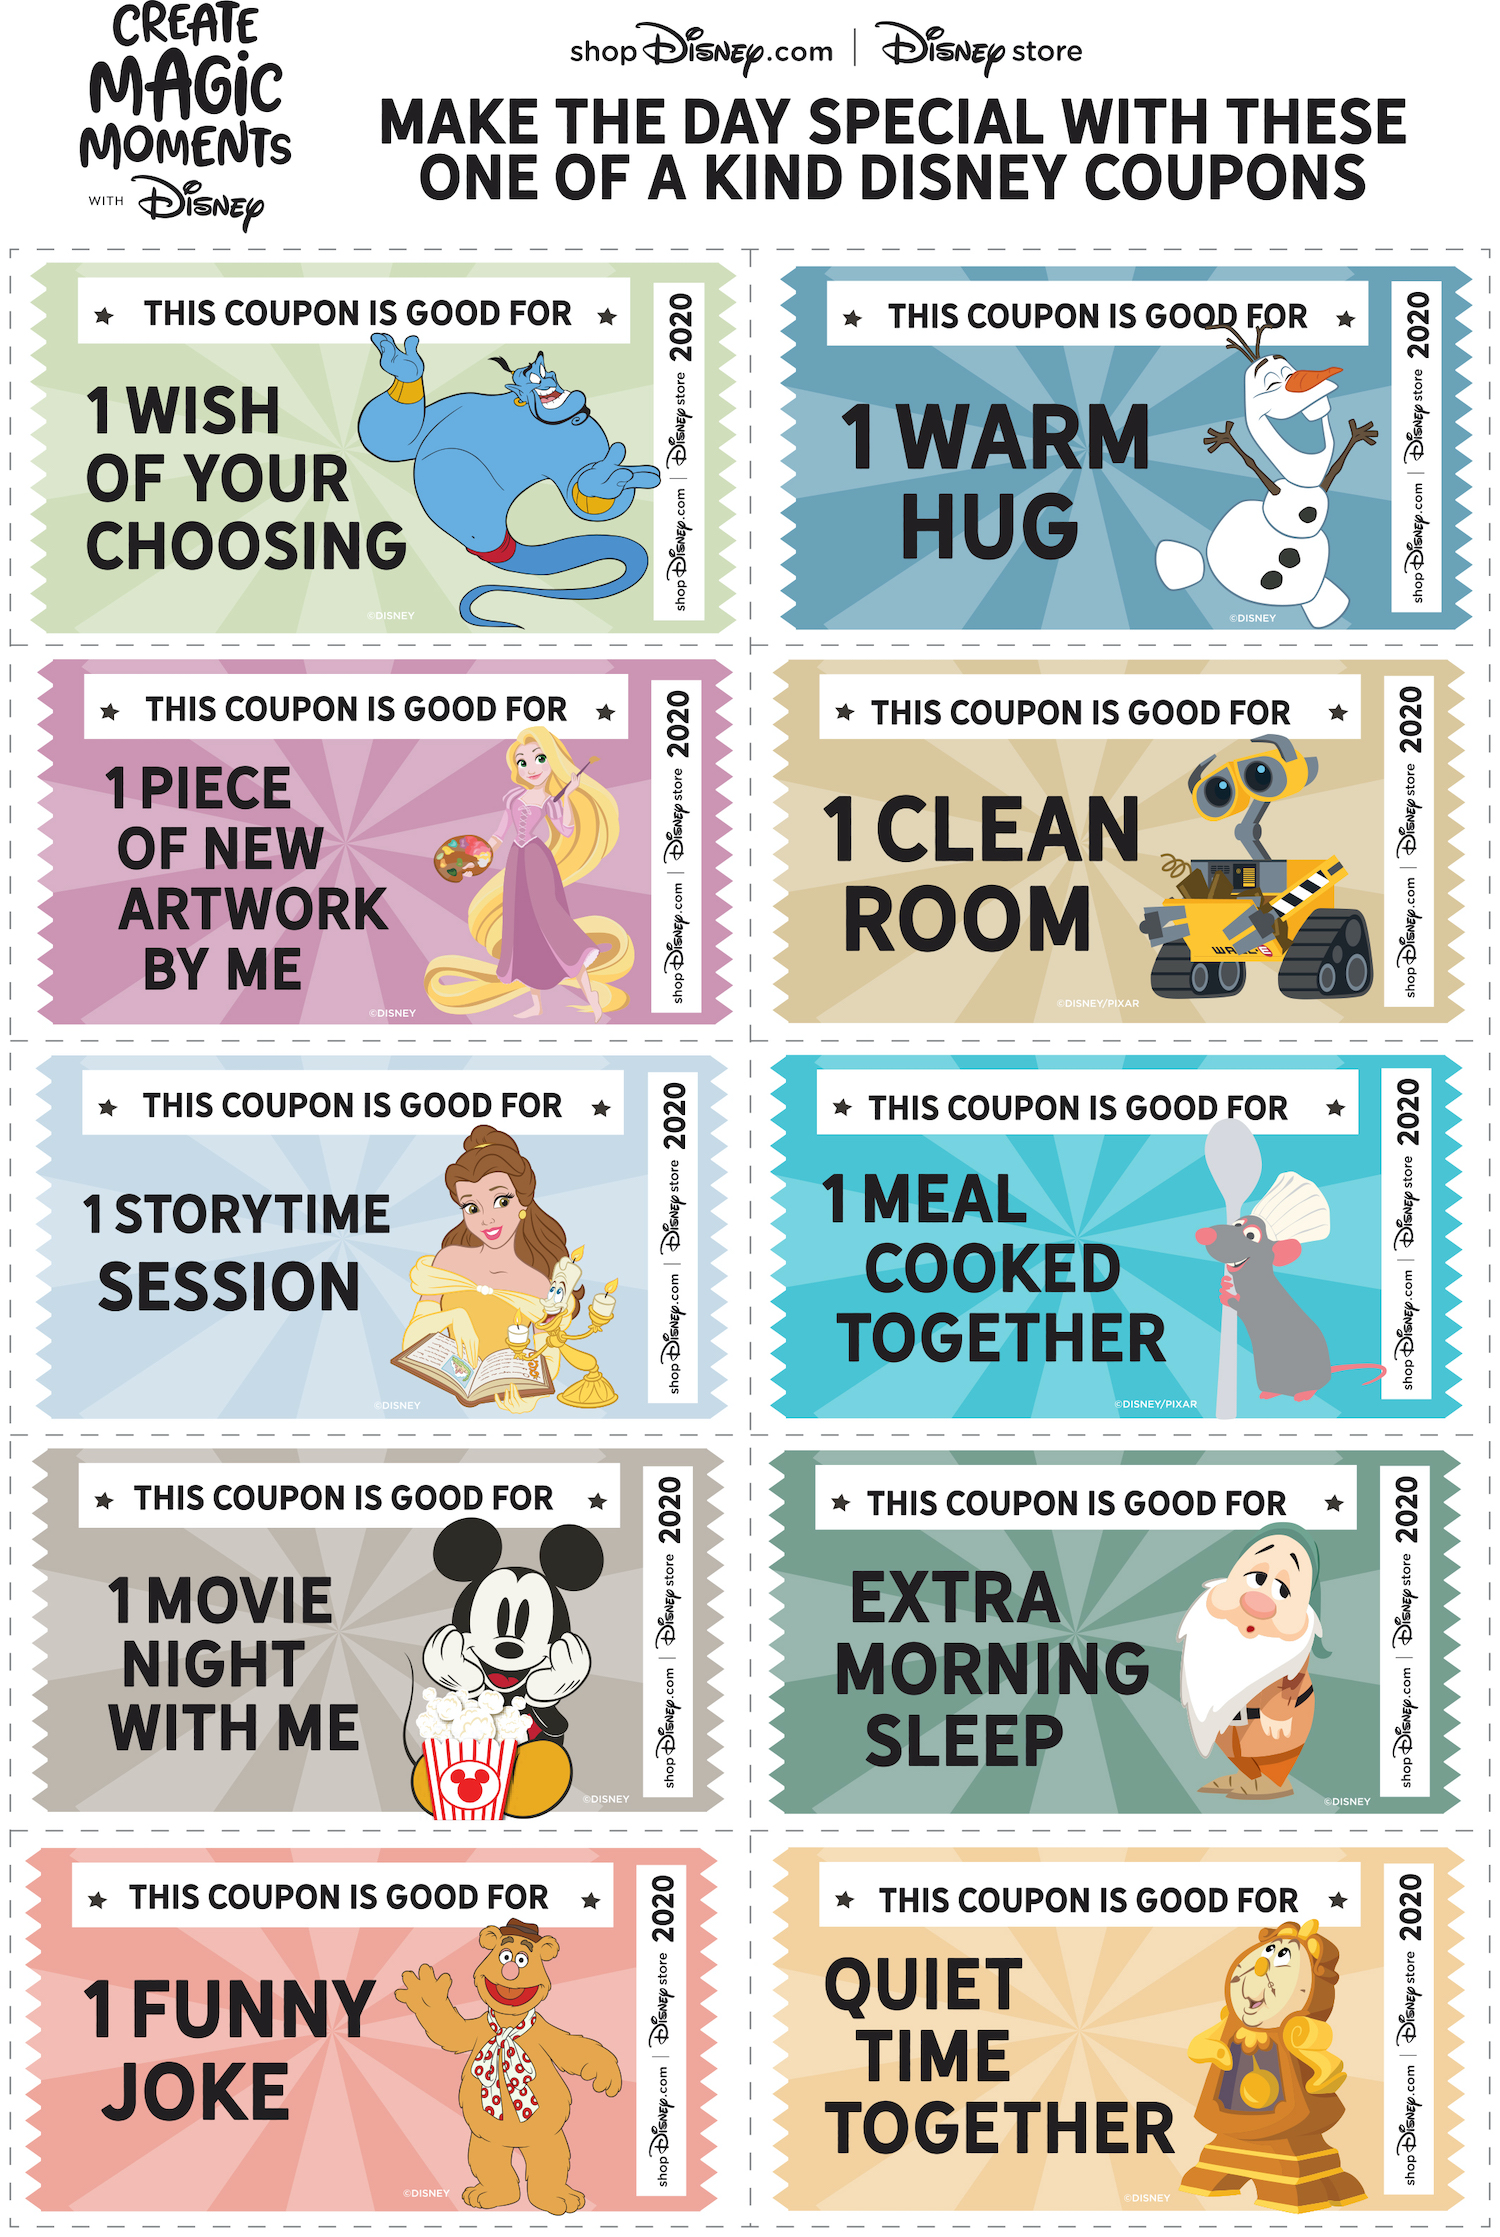 cash-in-on-the-mother-s-day-fun-with-disney-s-new-coupons